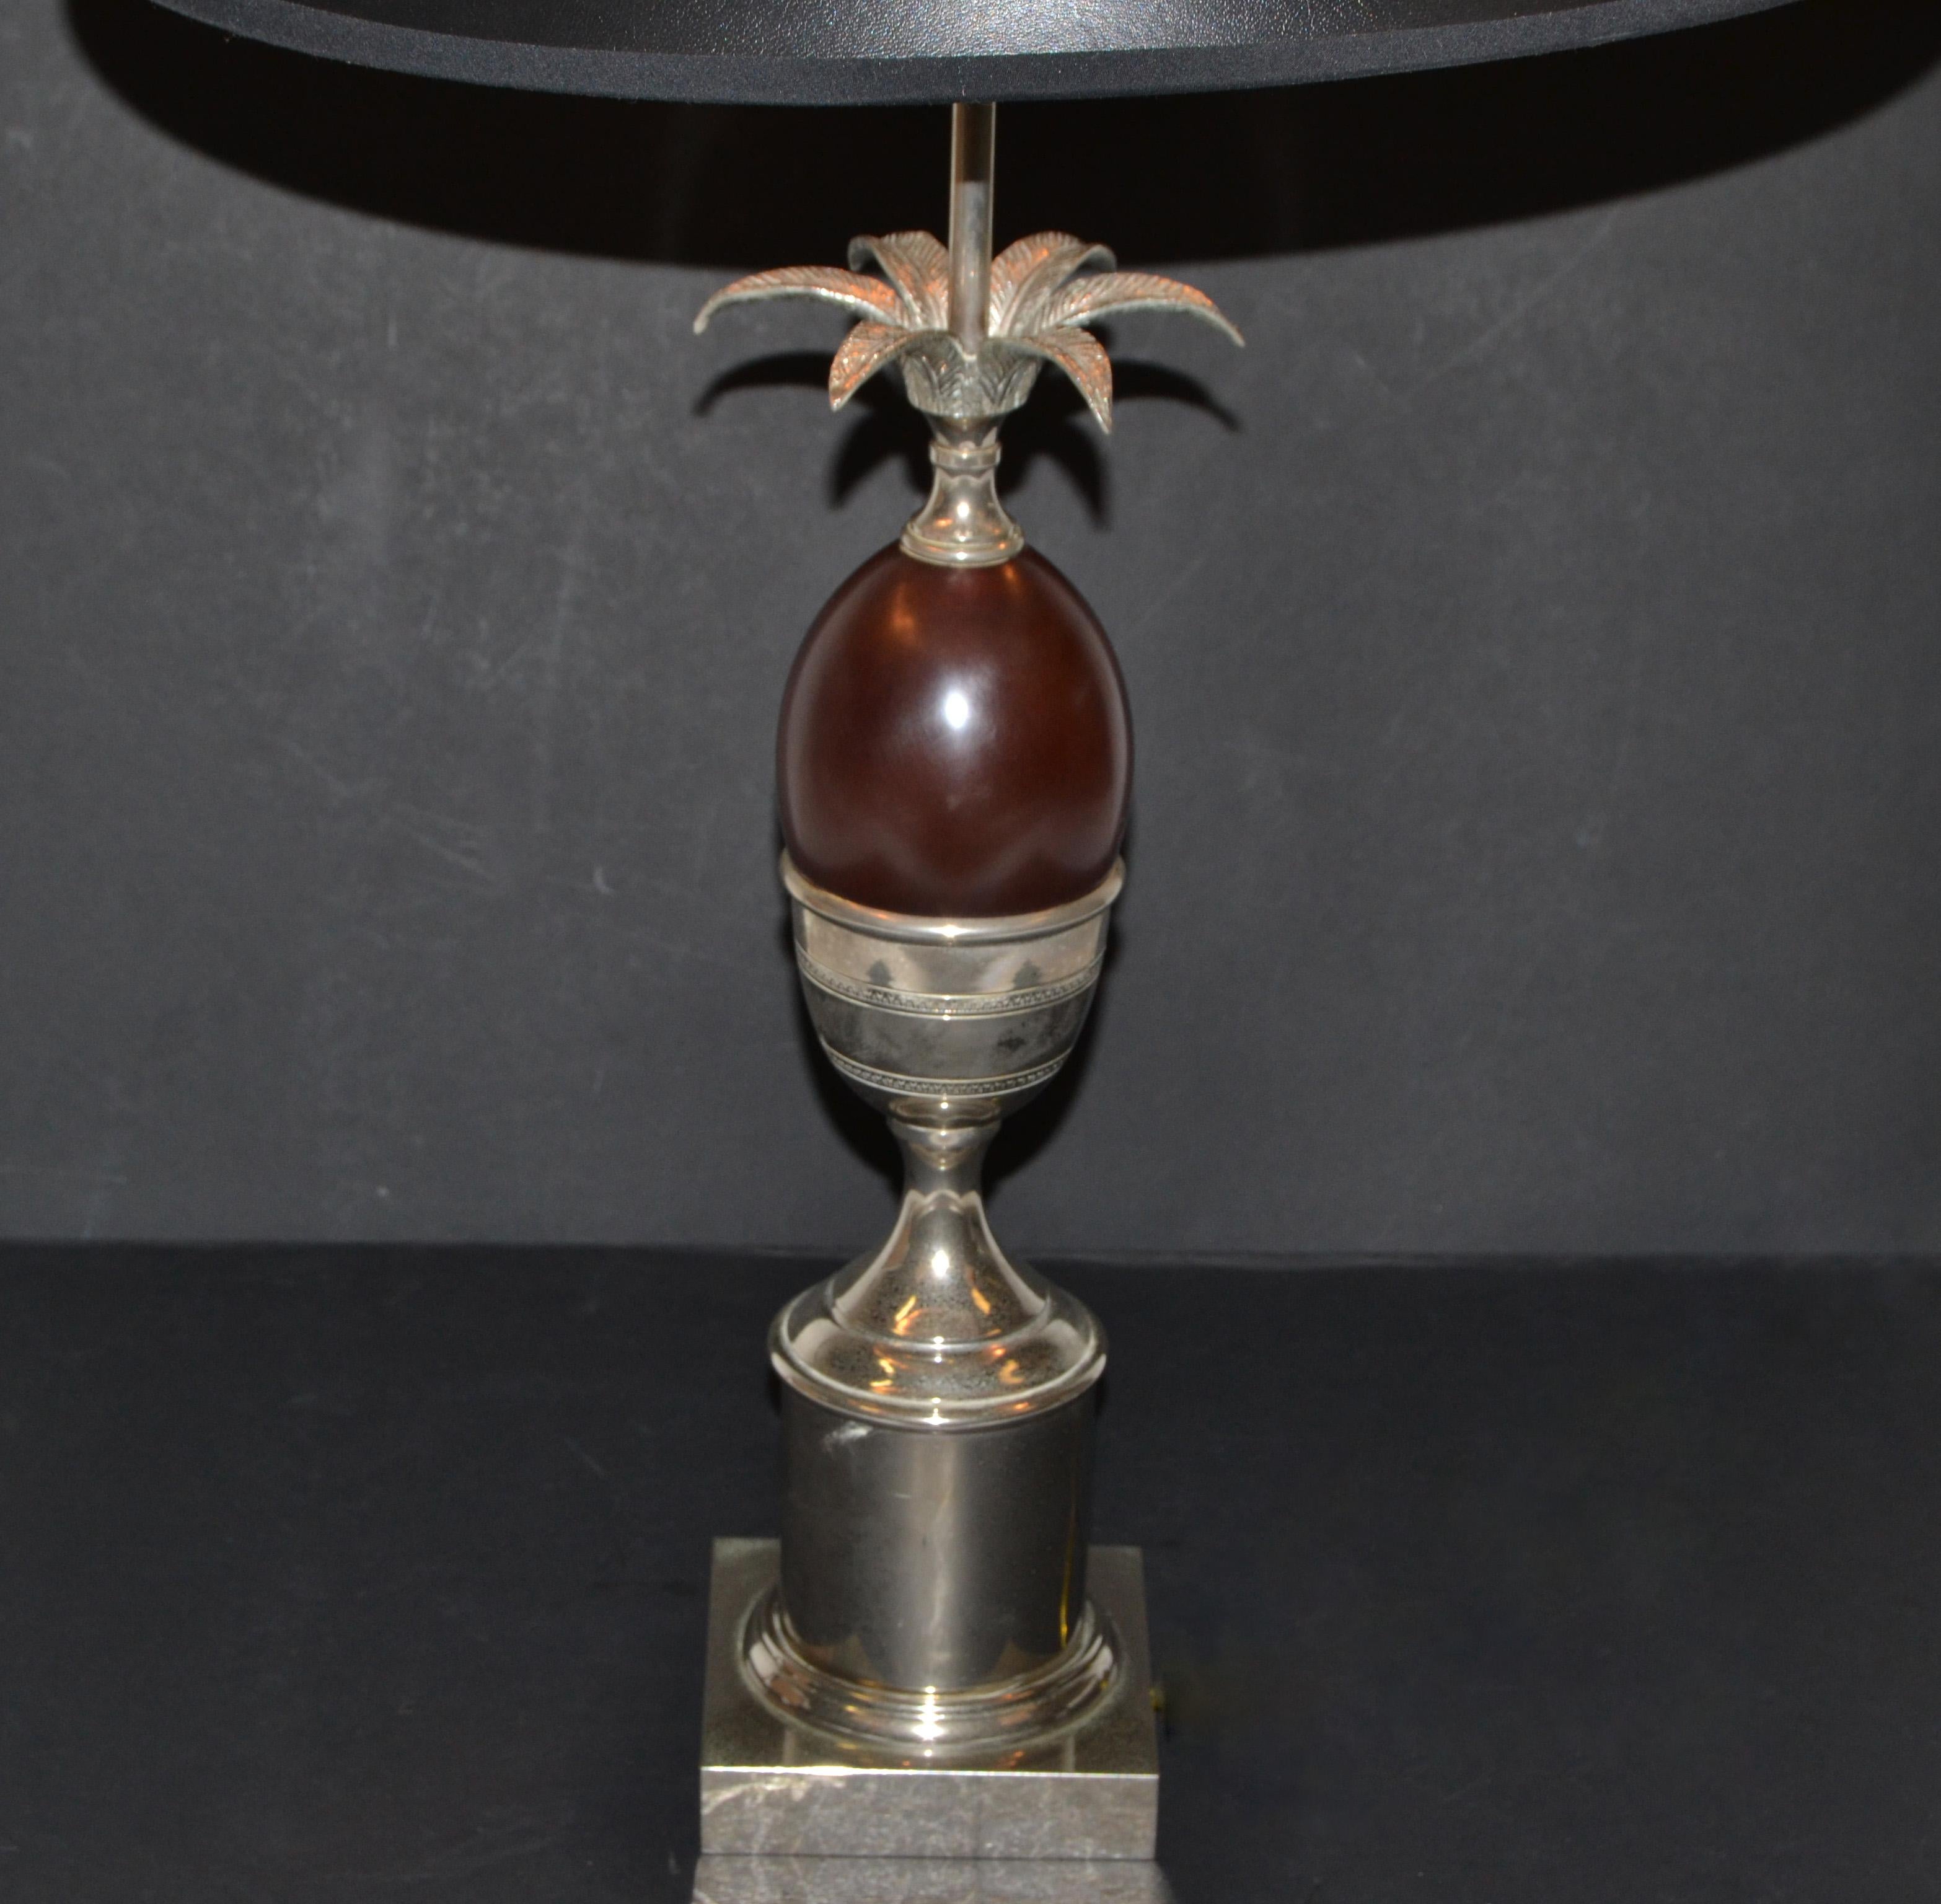 Neoclassical Maison Charles French Art Deco Red Acorn Nickel-Plated Table Lamp & Shade, 1950s For Sale